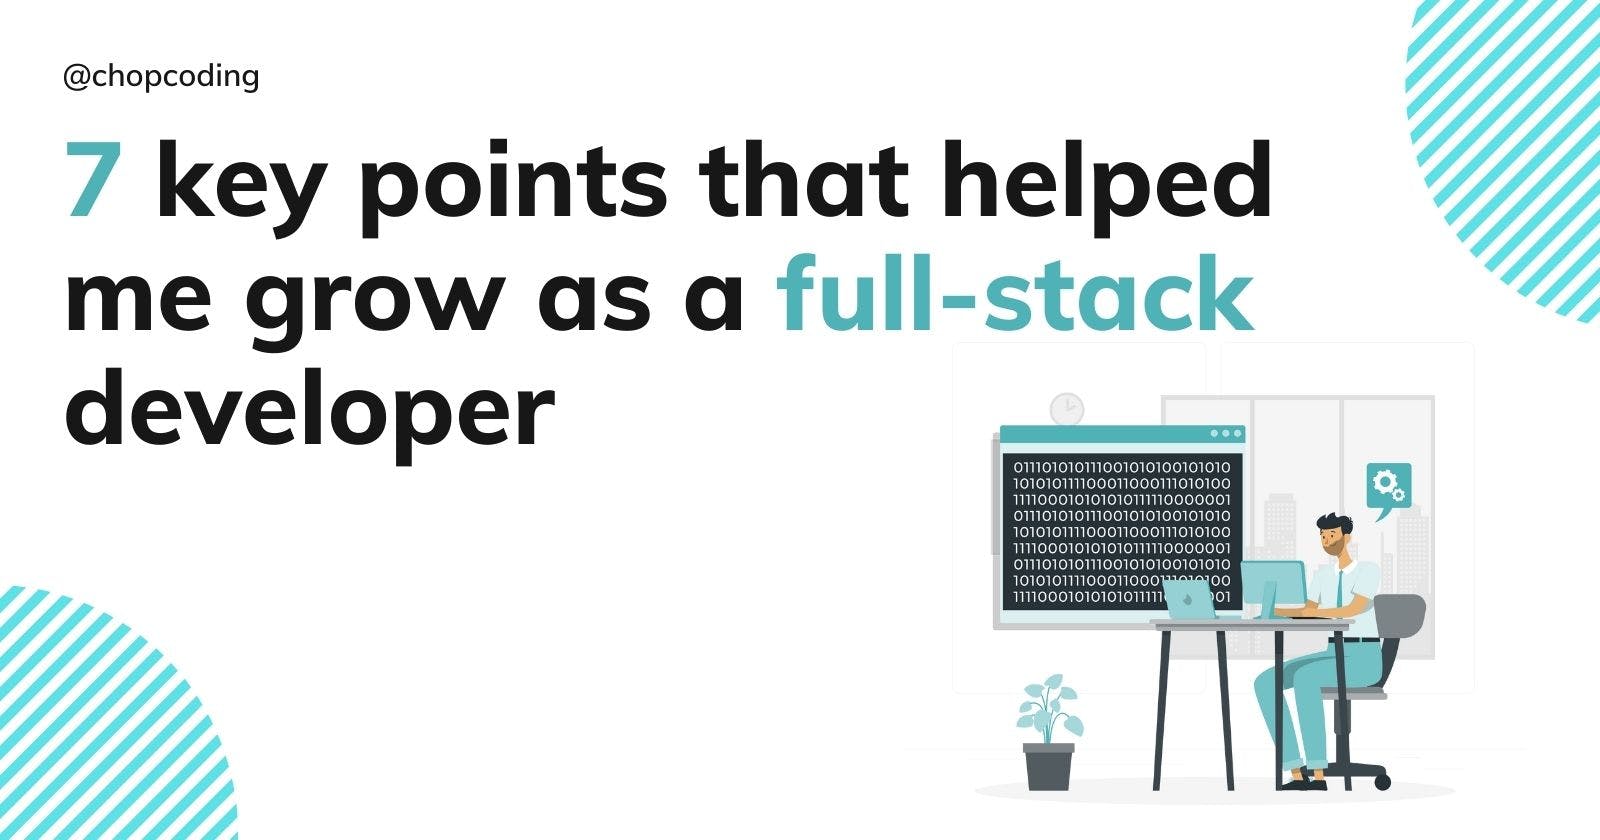 7 key points that helped me grow as a full-stack developer